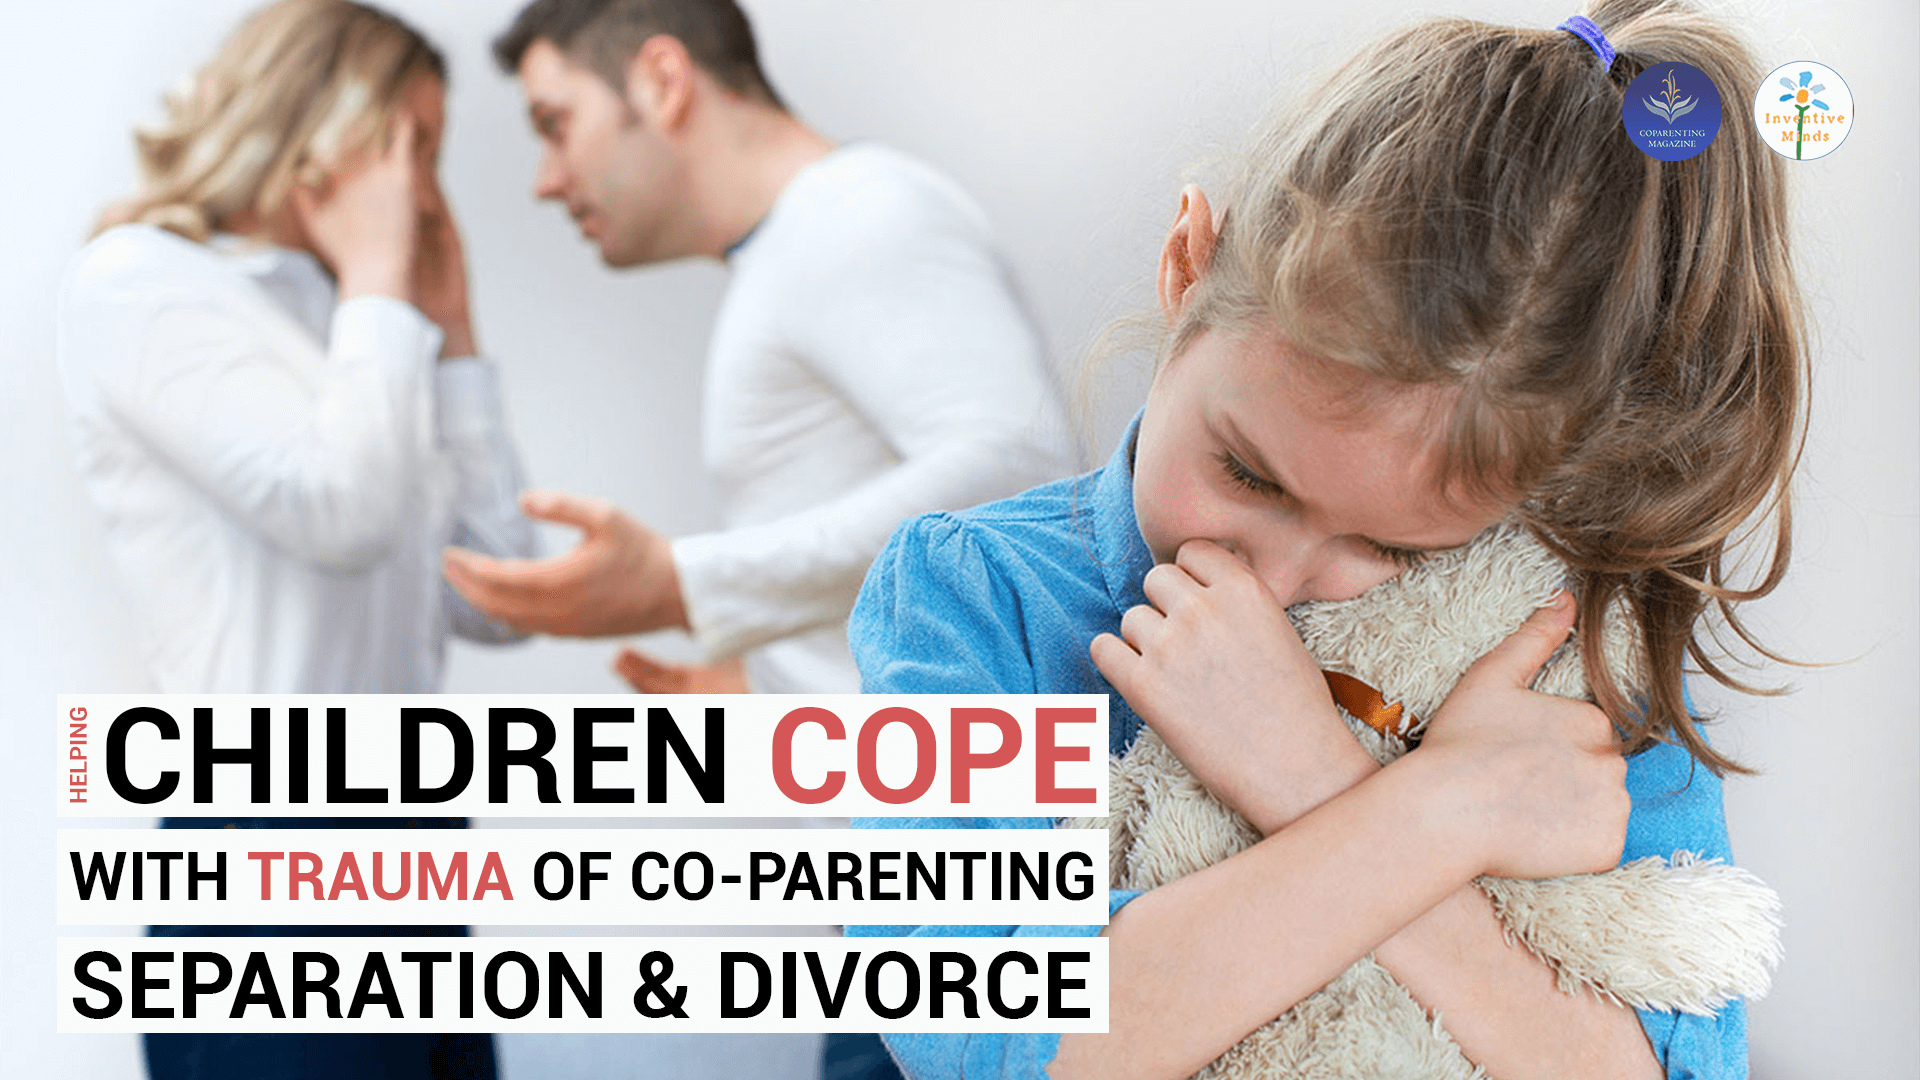 Helping Children Cope with Trauma of Co-Parenting, Separation and Divorce